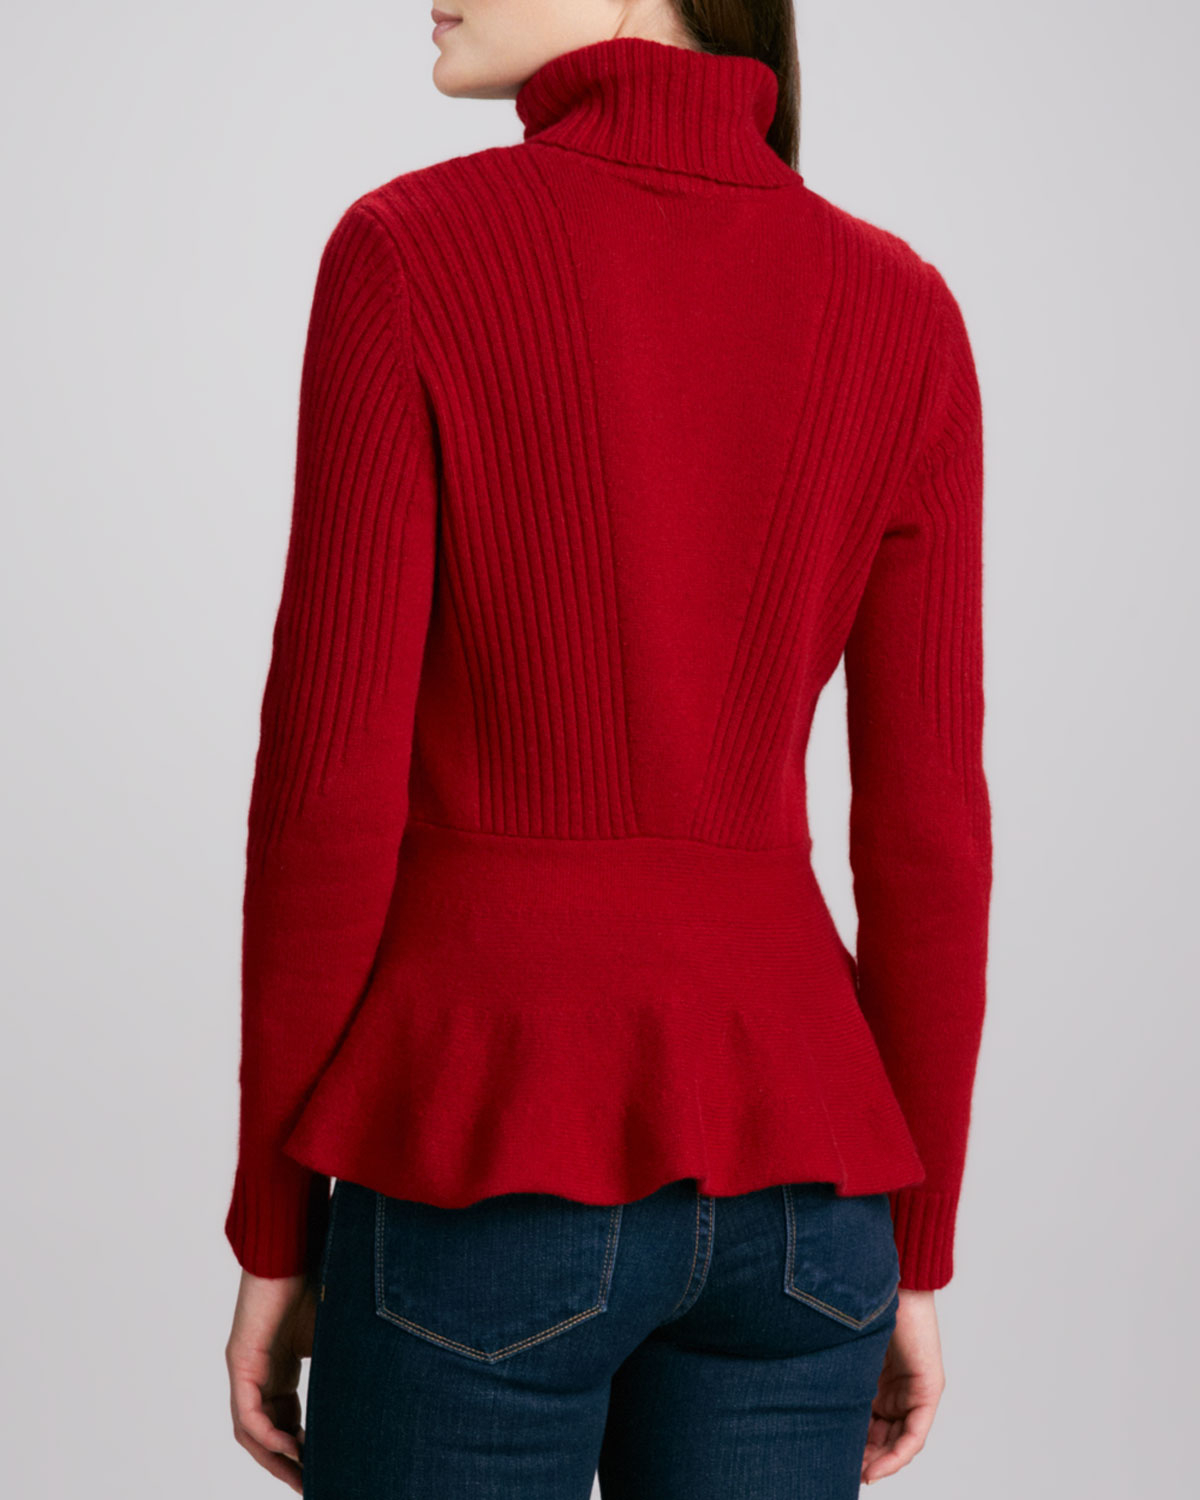 Magaschoni Cashmere Turtleneck Peplum Sweater in Red | Lyst